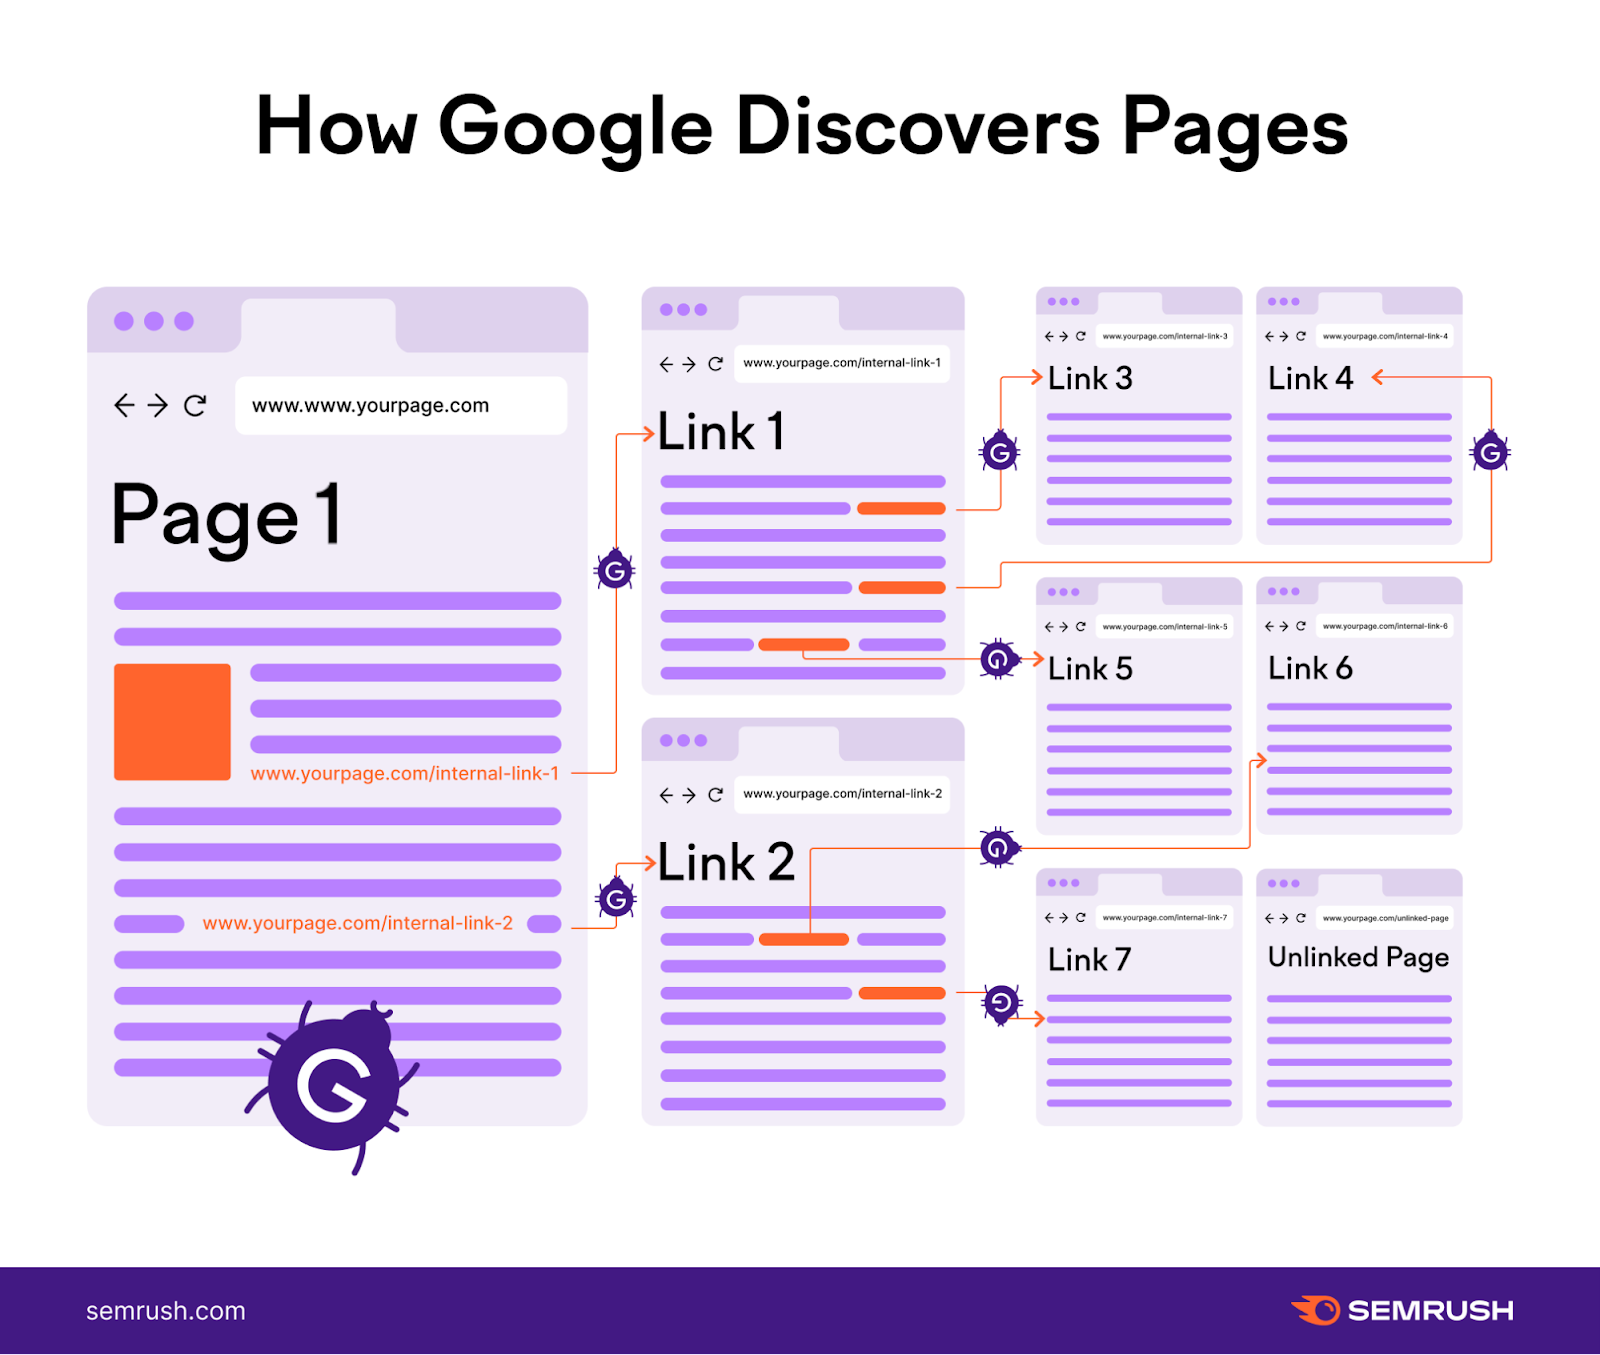 "How Google Discovers Pages" infographic